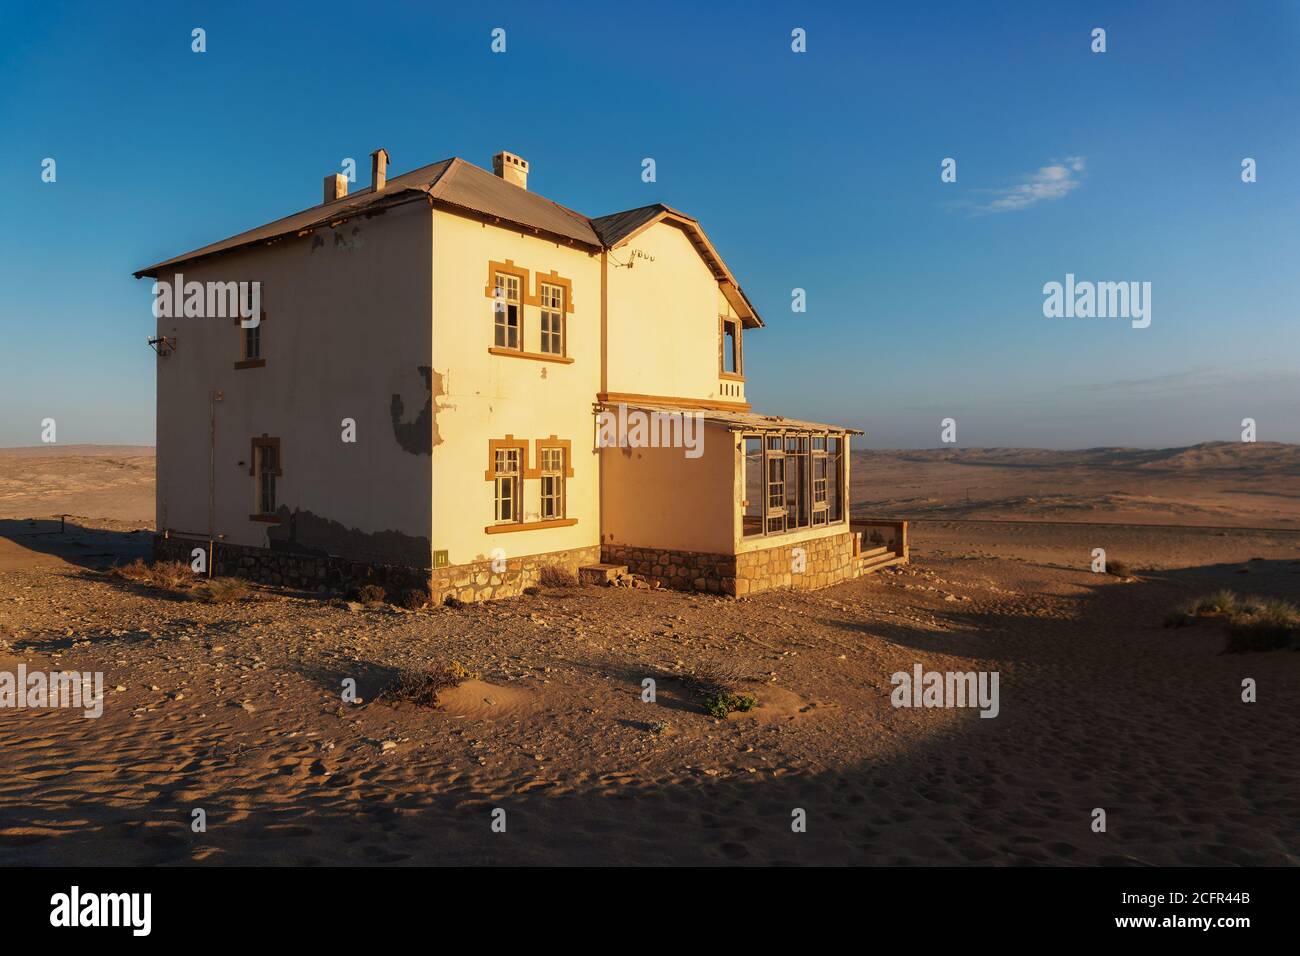 Abandoned house in Kolmanskop ghost town, Namibia Stock Photo